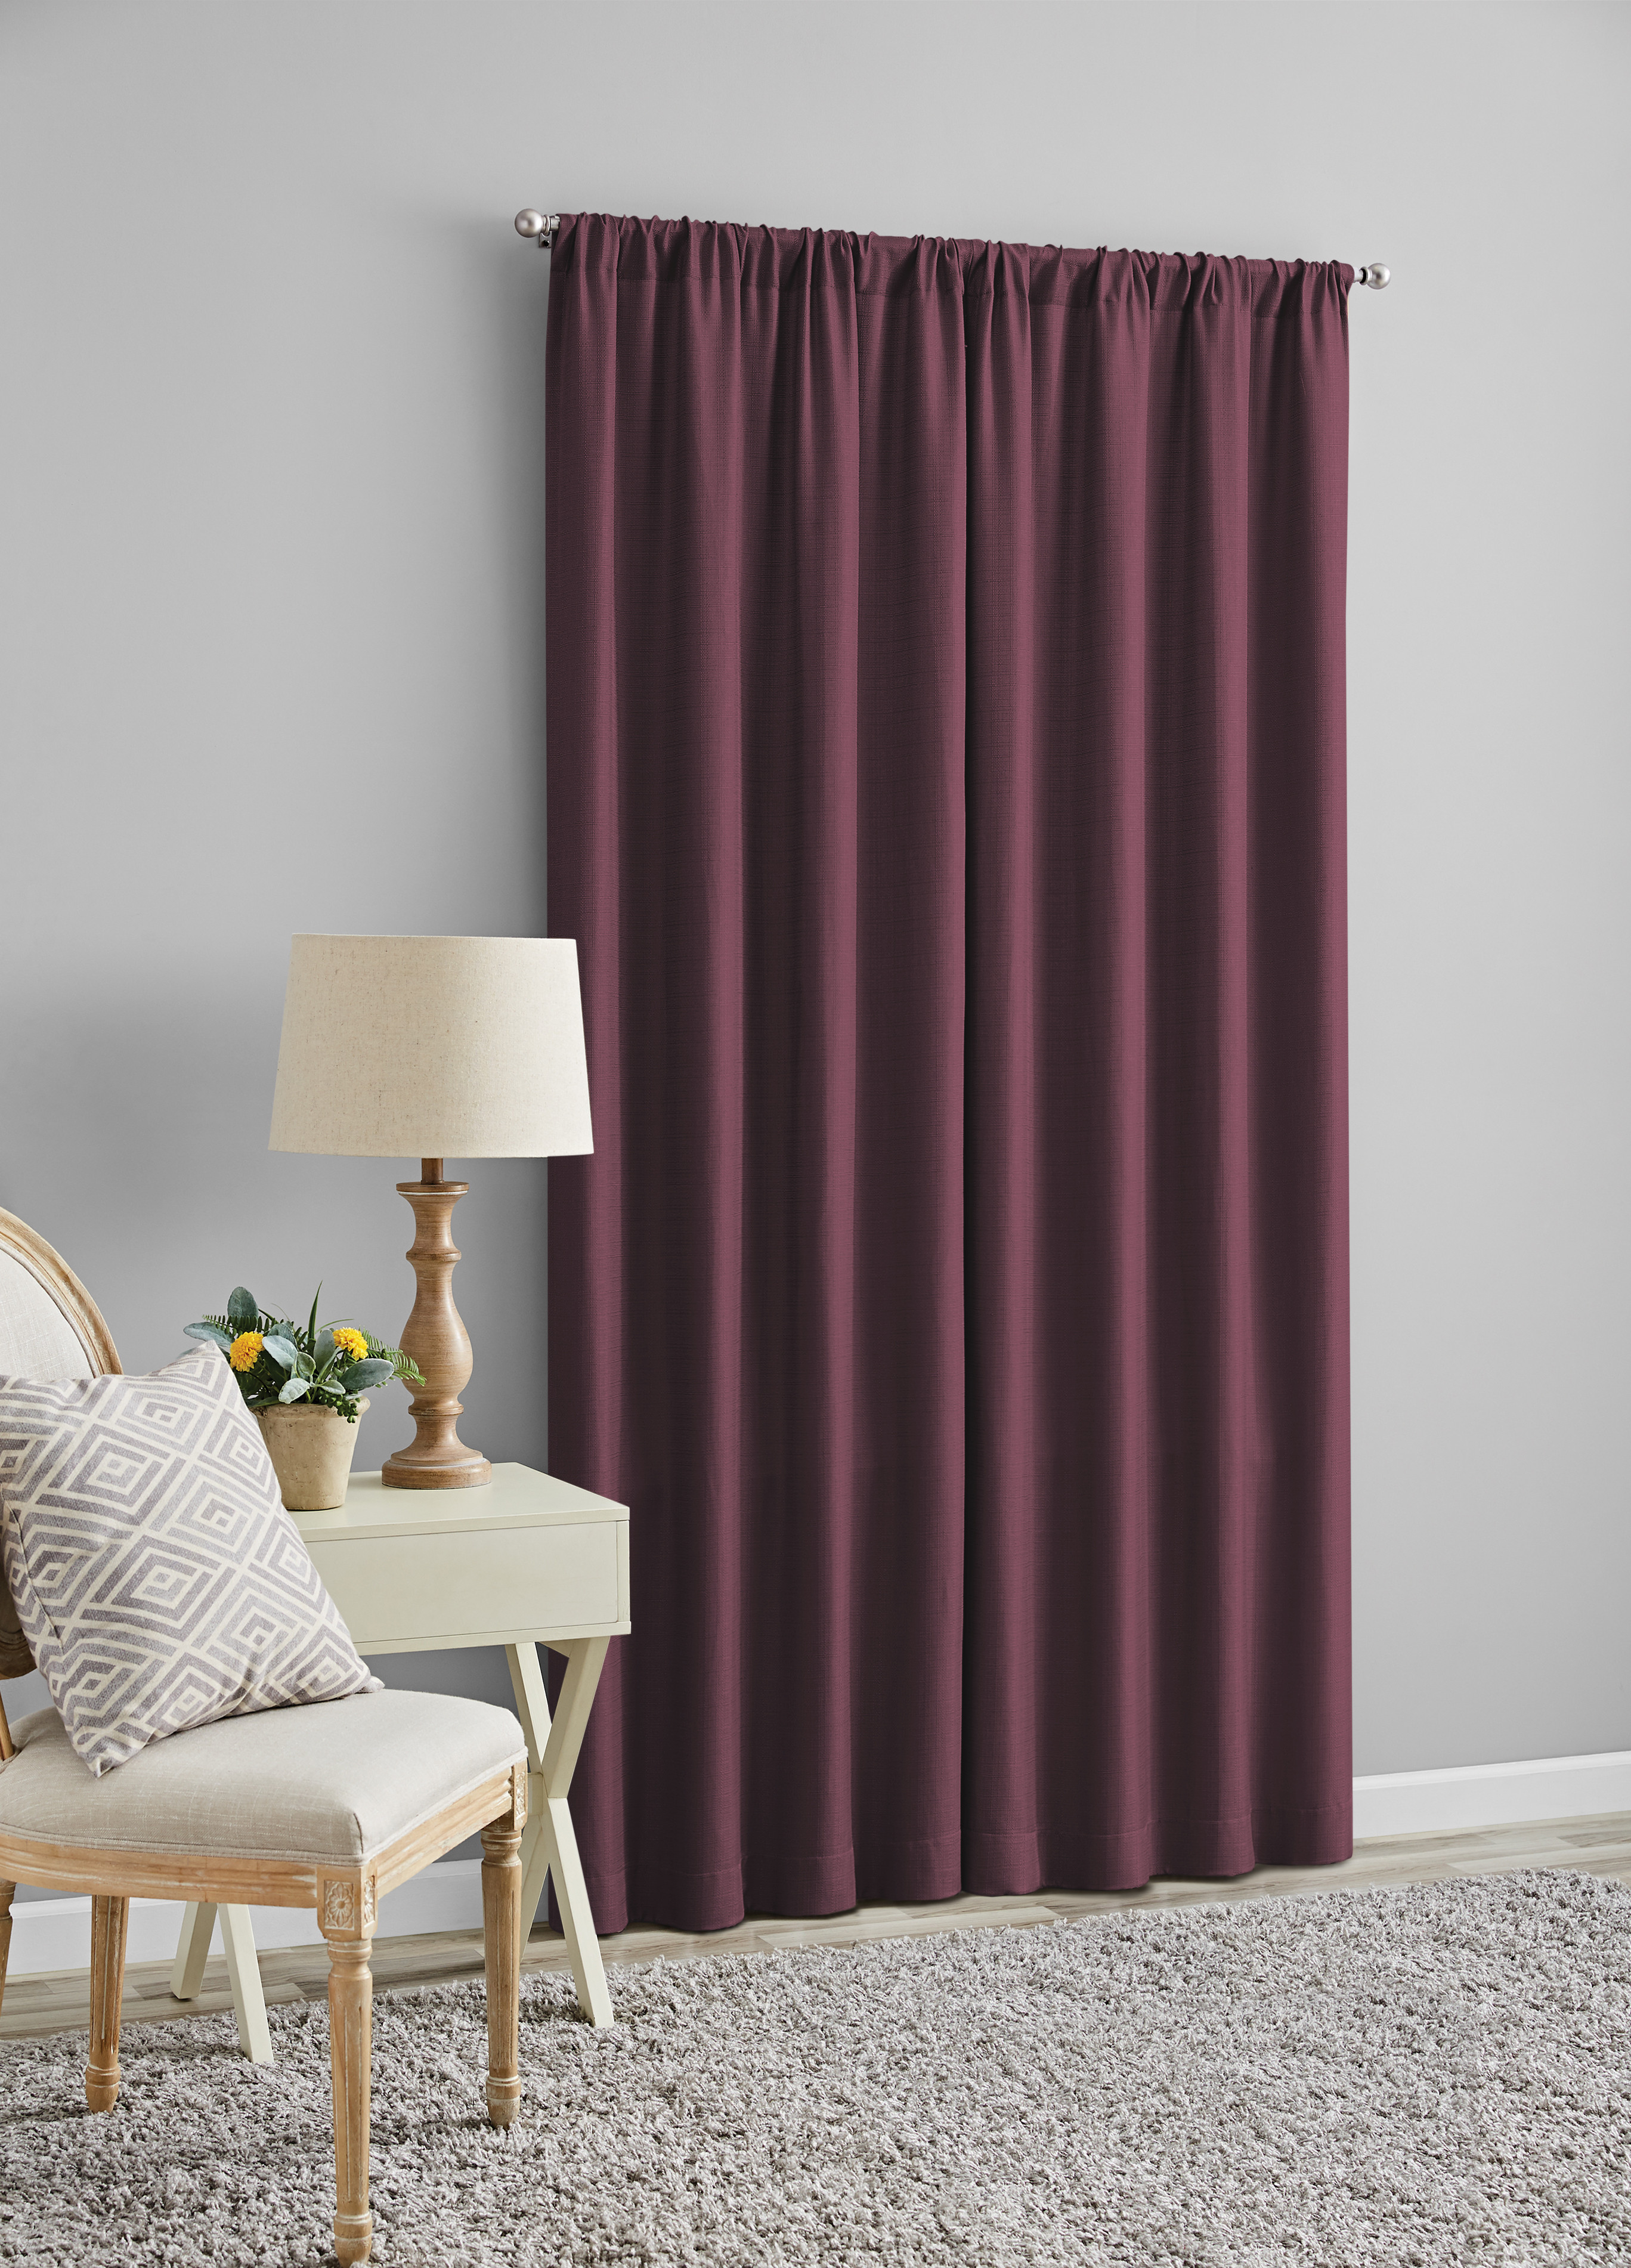 Mainstays Southport Burgundy Solid Color Light Filtering Rod Pocket Curtain Panel Pair, 40" x 84" - image 2 of 10